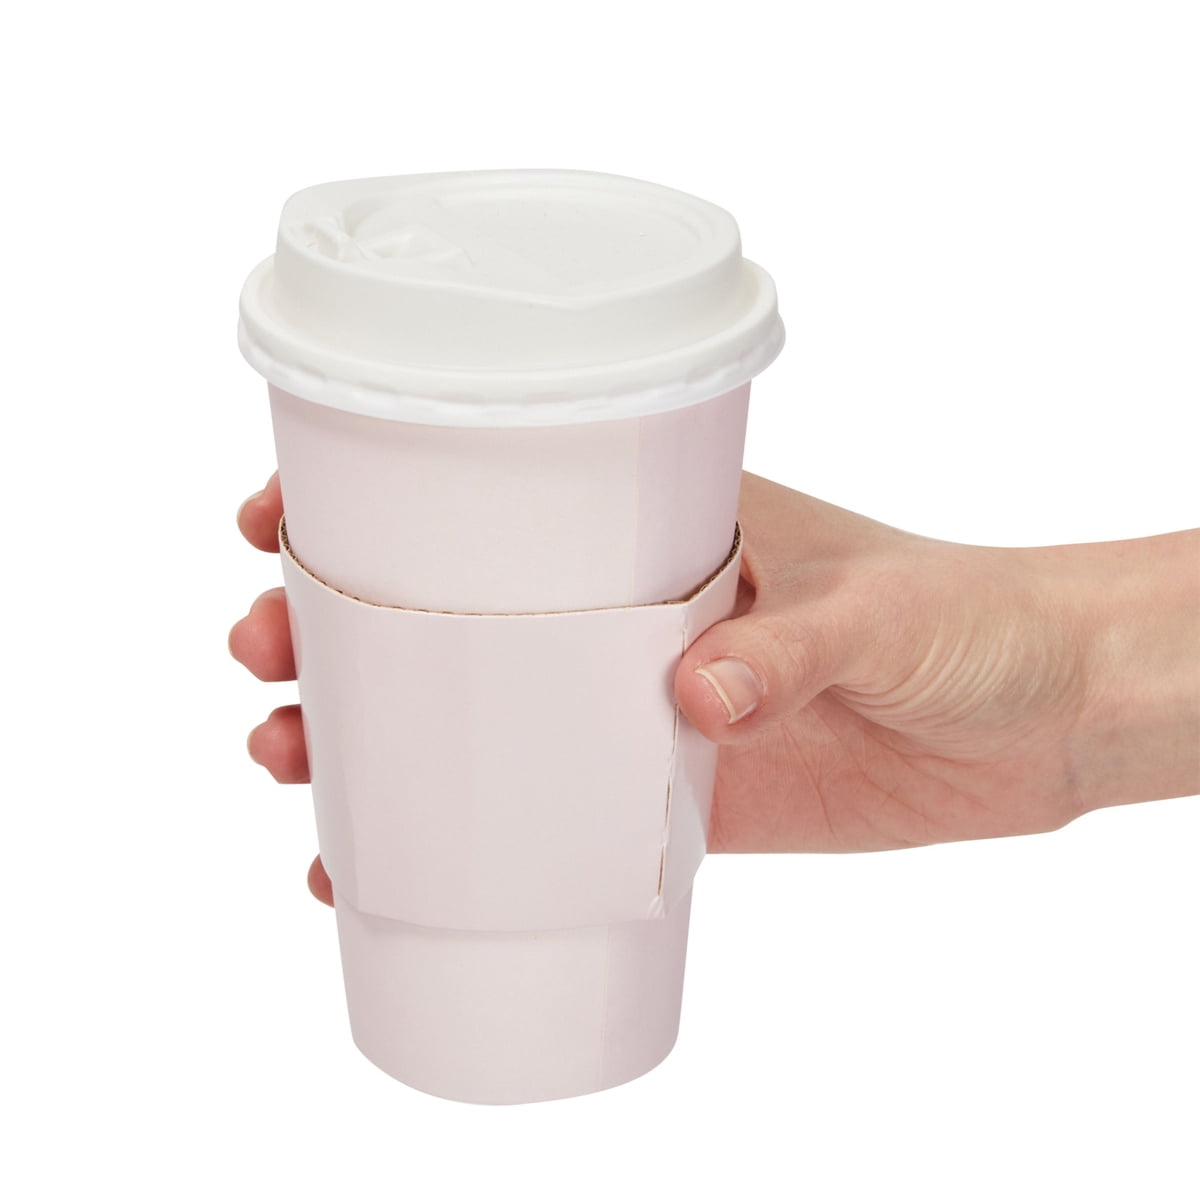 48x Disposable Coffee Cups with Lids and Sleeves Bulk for Hot To